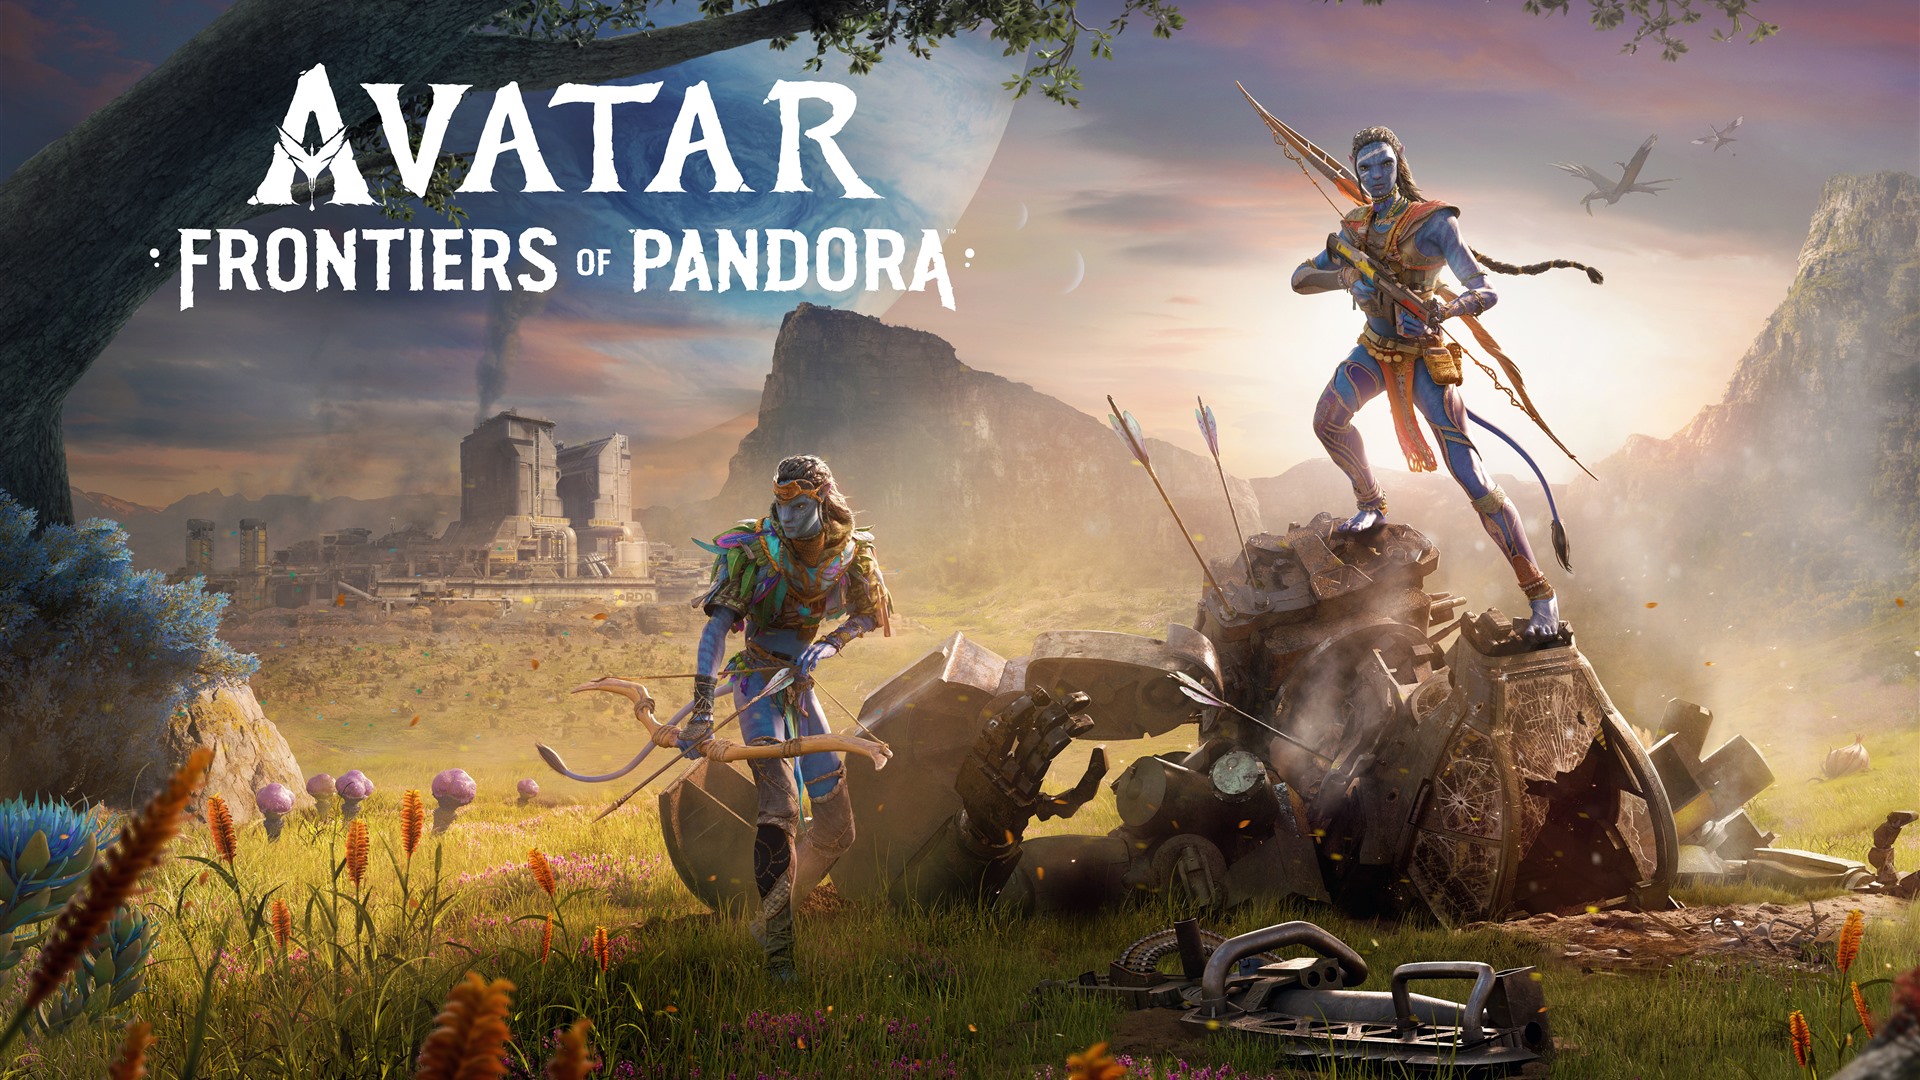 Avatar The way of Water Frontiers of Pandora Game Wallpaper